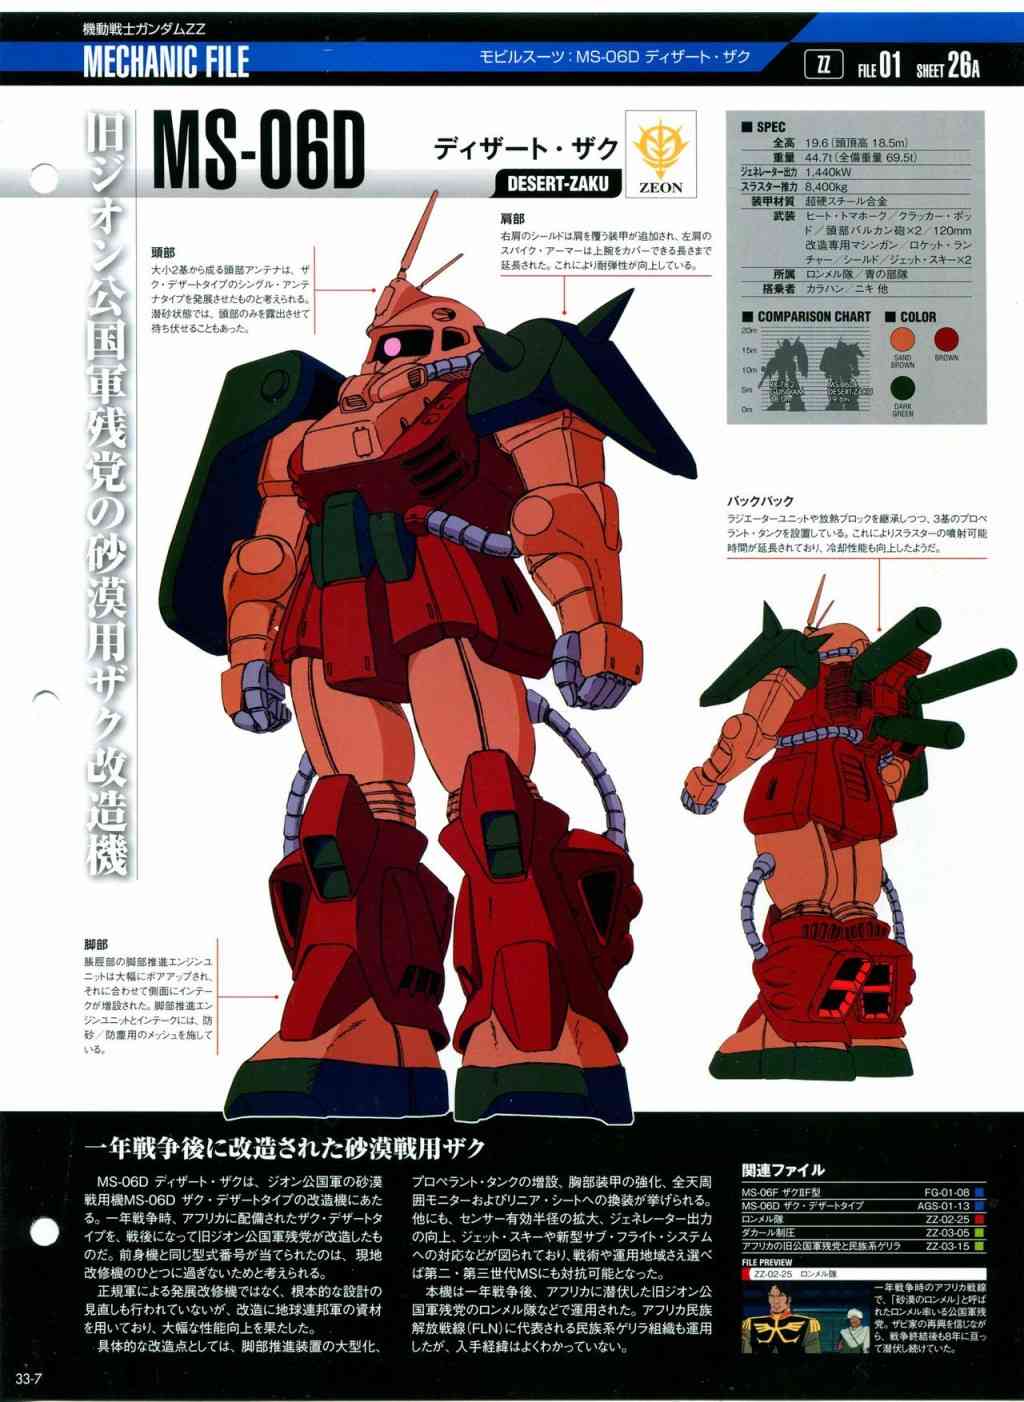 The Official Gundam Perfect File  - 第31-40話(2/8) - 4